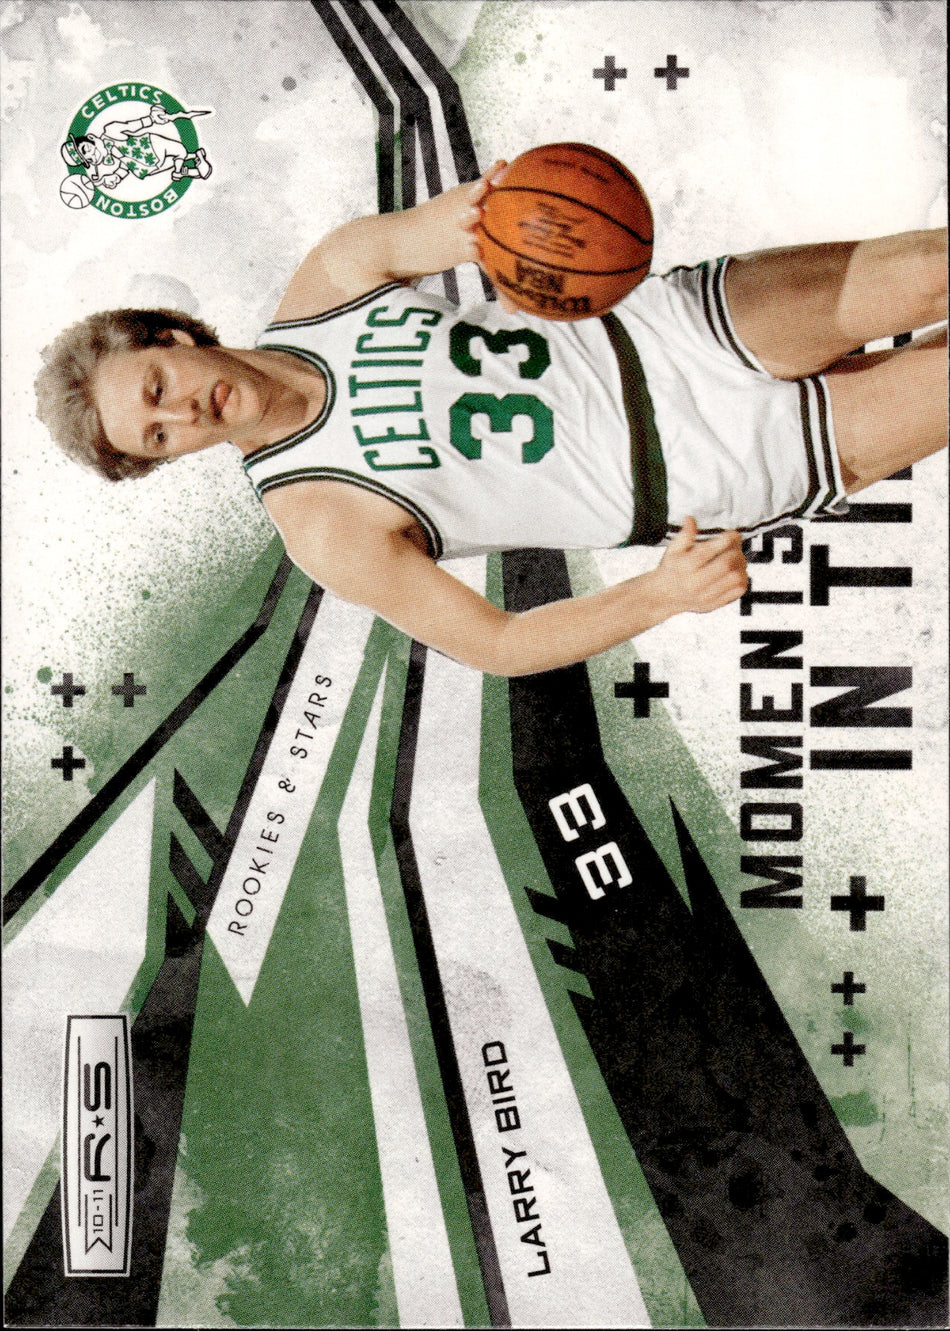 LARRY BIRD 2010 PANINI MOMENTS IN TIME NO. 7